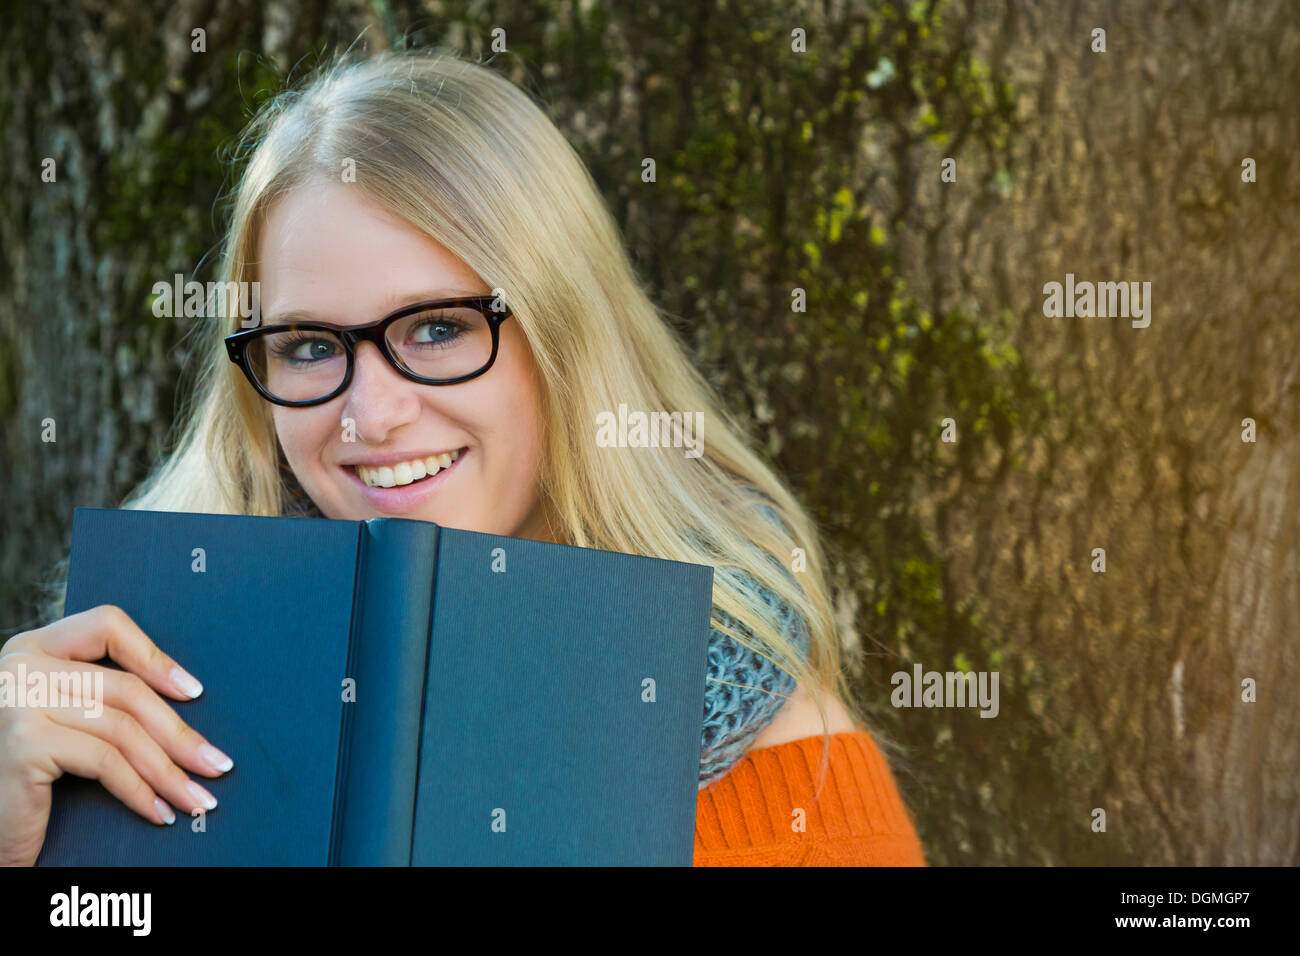 Young woman wearing glasses looking over the edge of a book Stock Photo